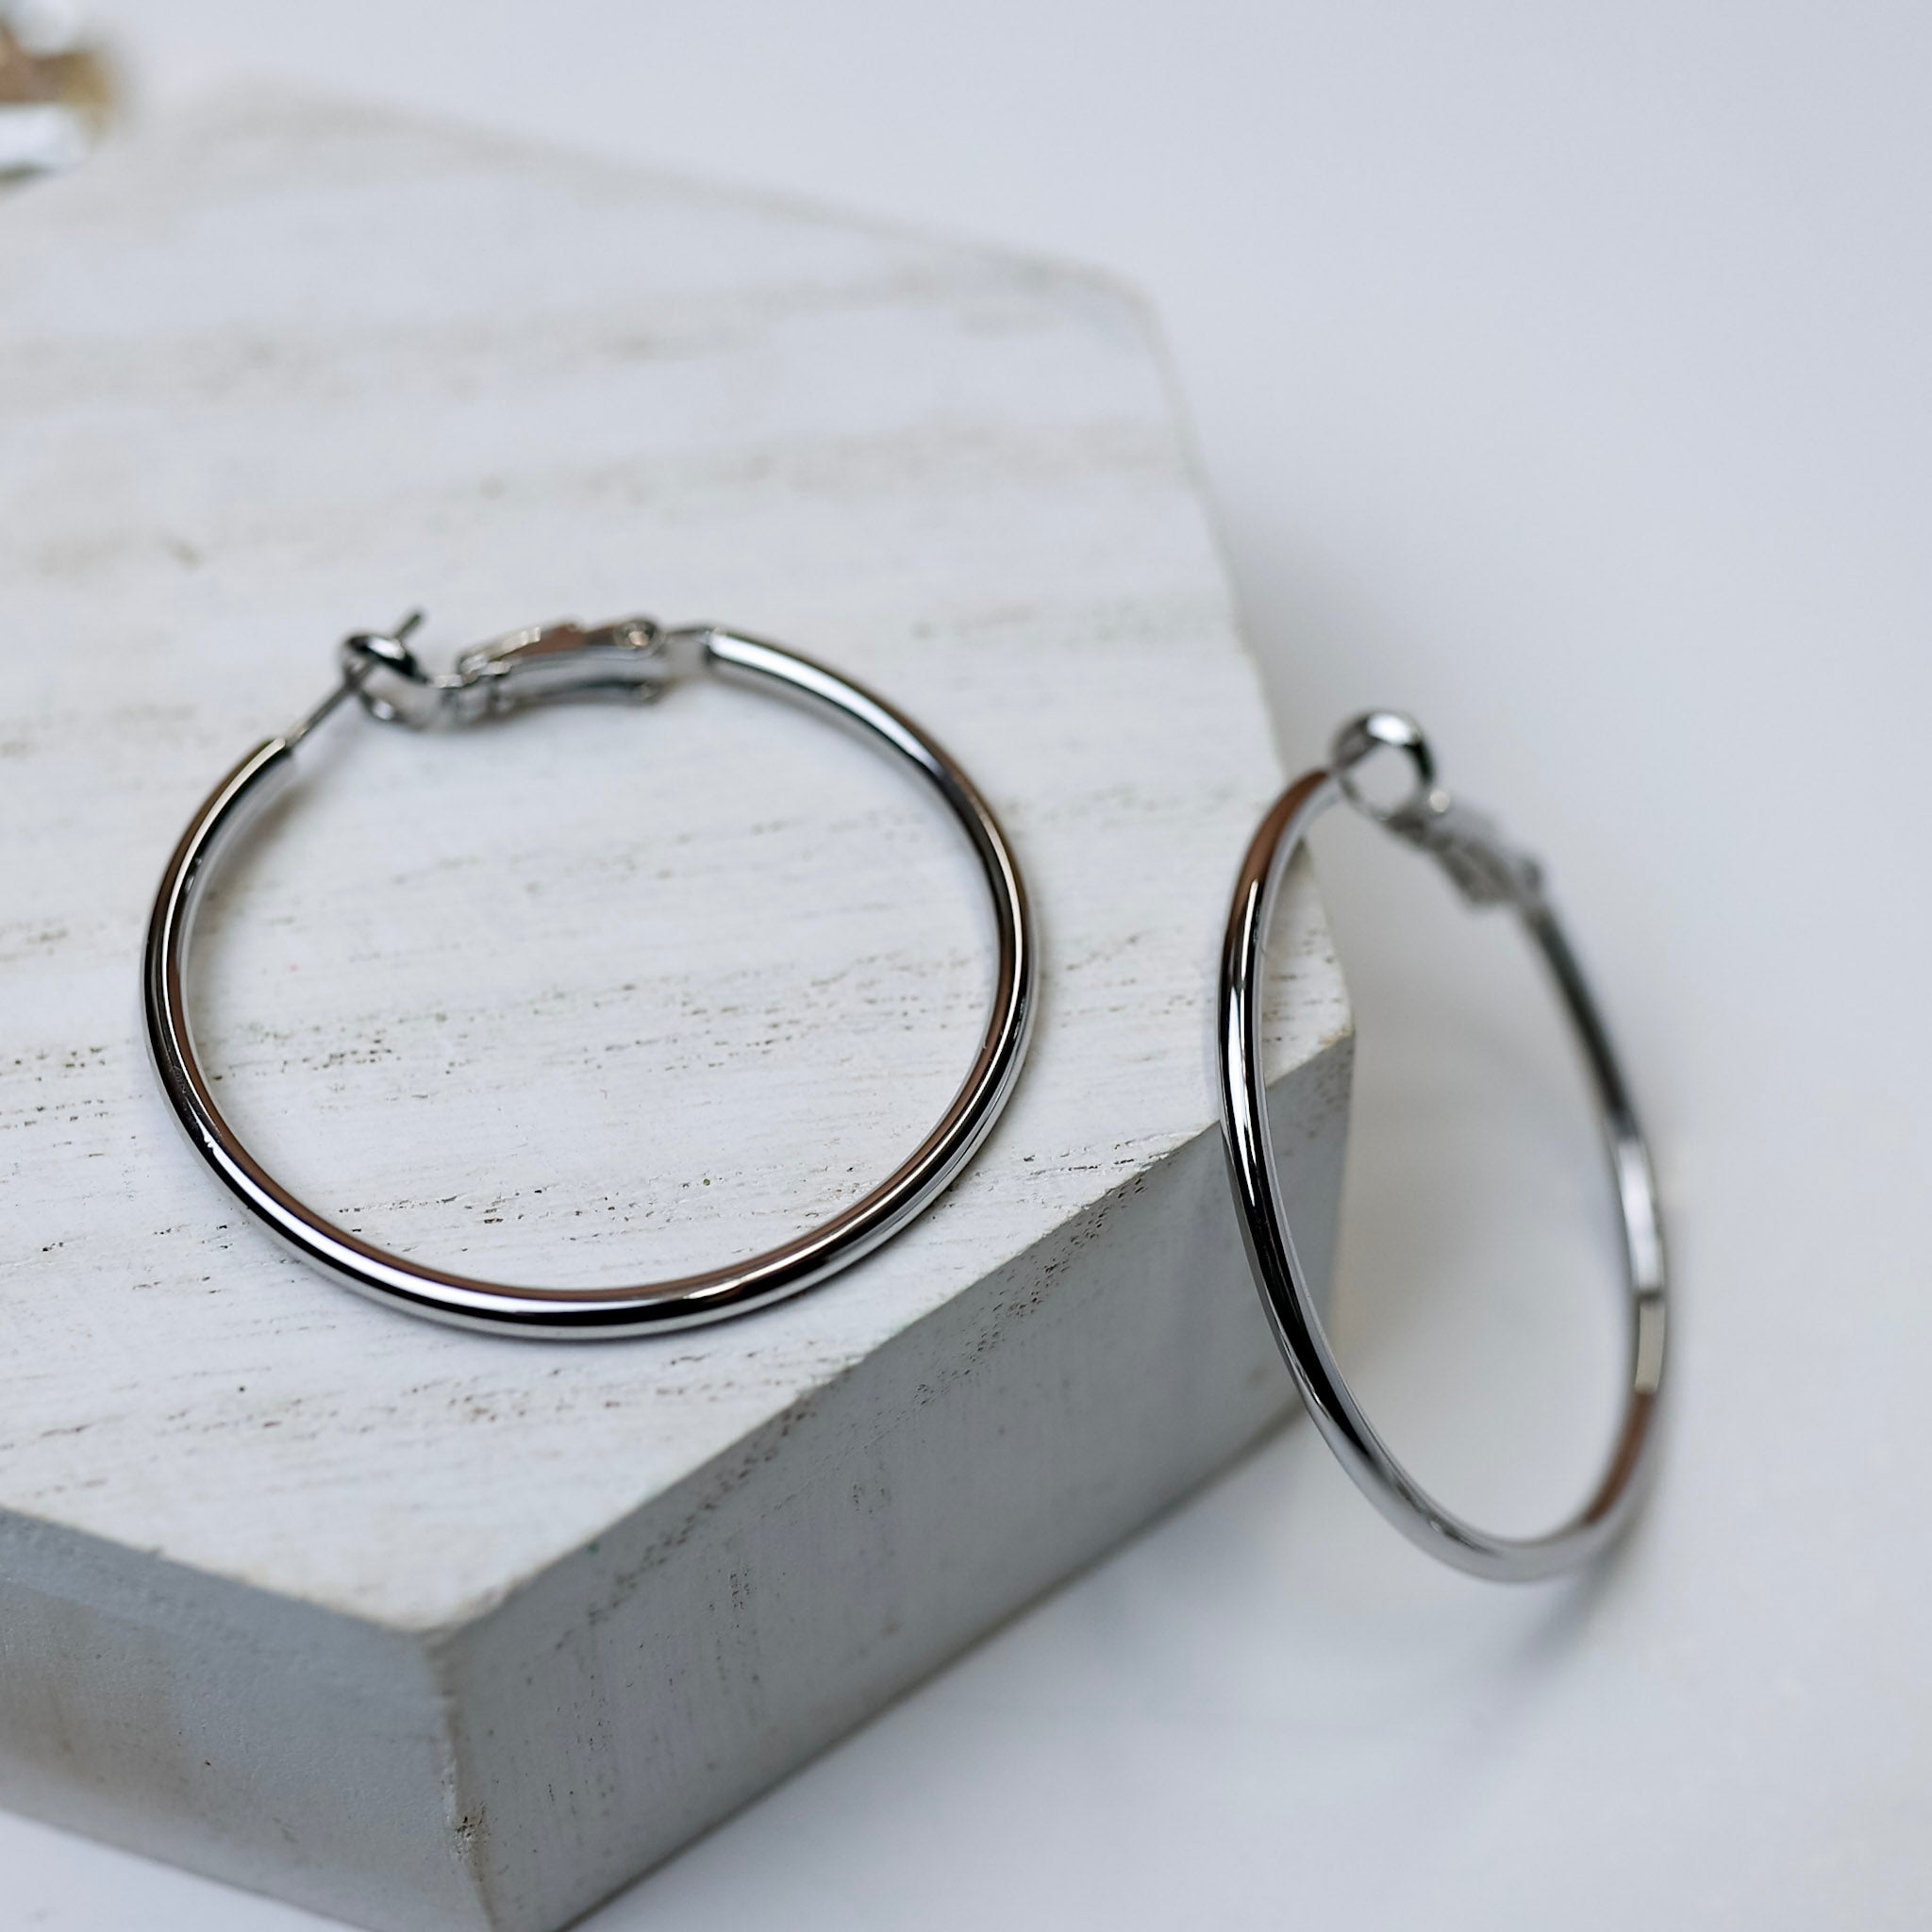 A pair of silver-tone circle hoop earrings pictured on a white background with crystal necklaces.